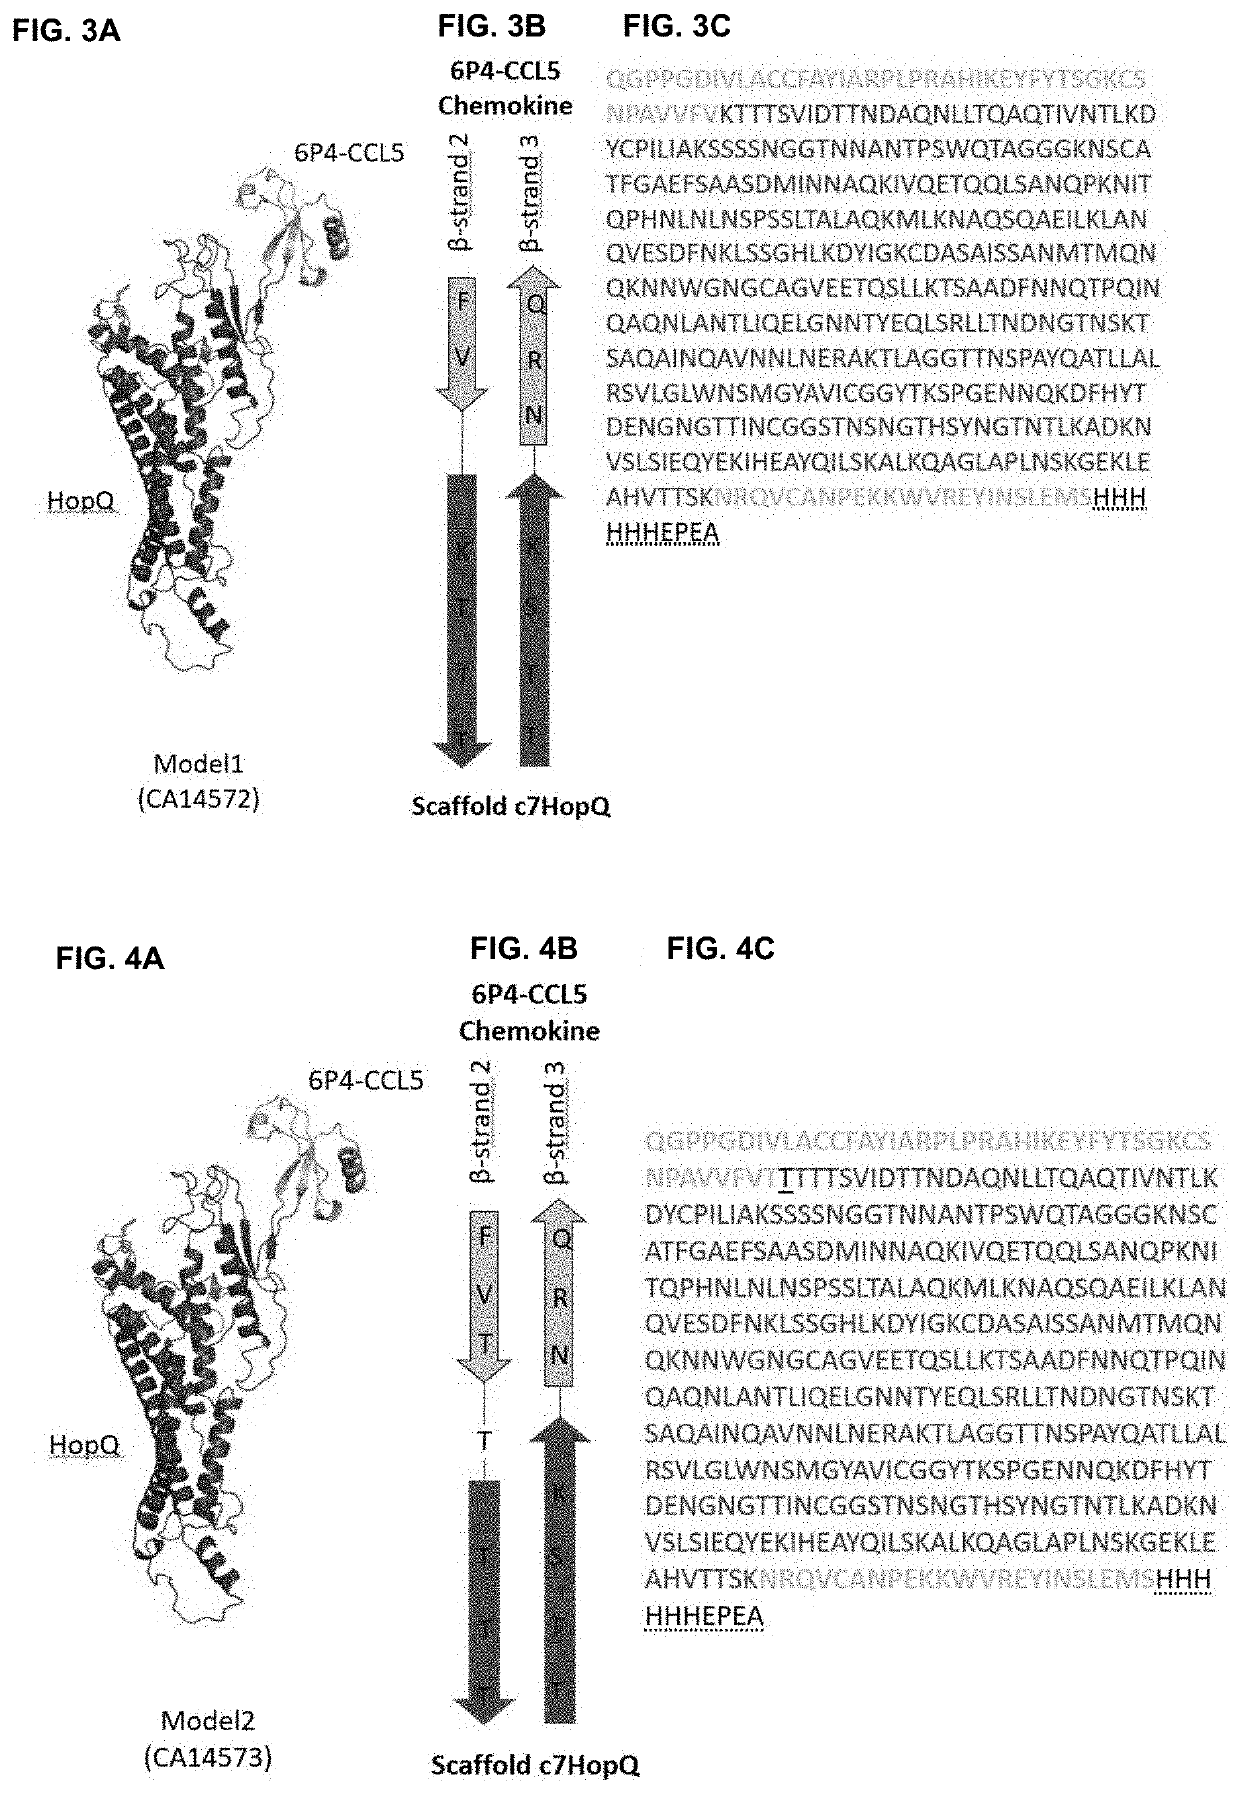 Fusion proteins comprising a cytokine and scaffold protein